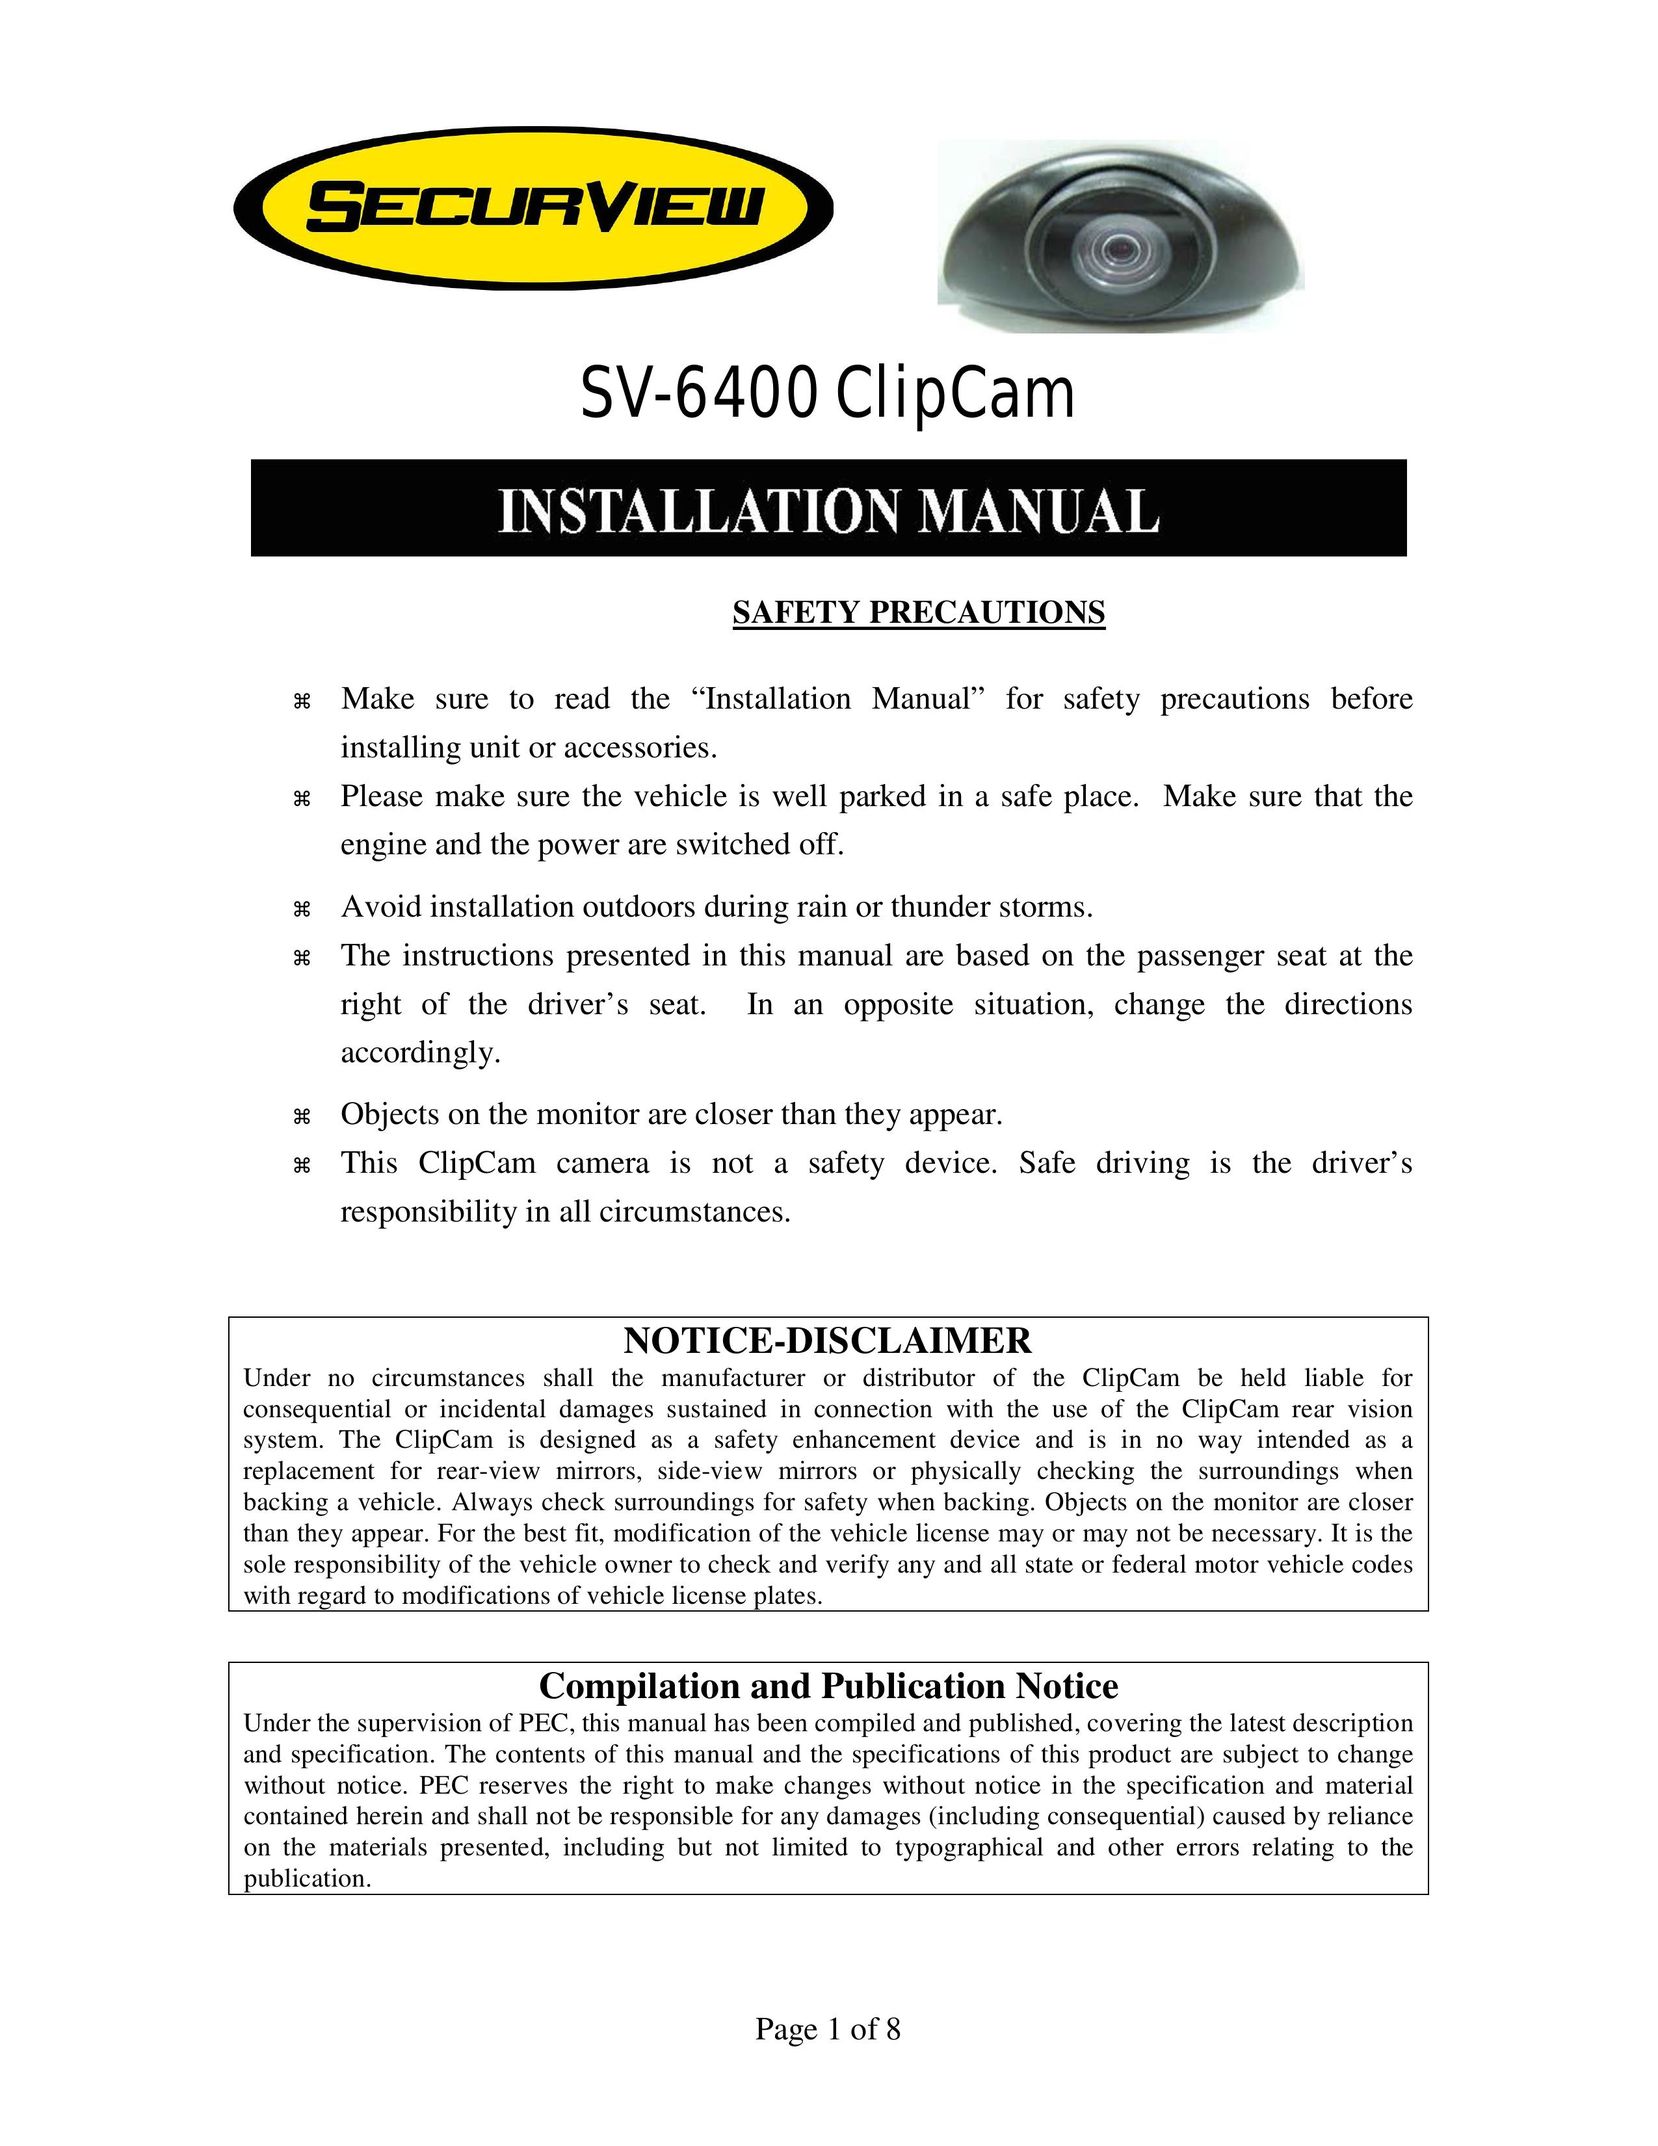 Crimestopper Security Products SV-6400 Indoor Furnishings User Manual